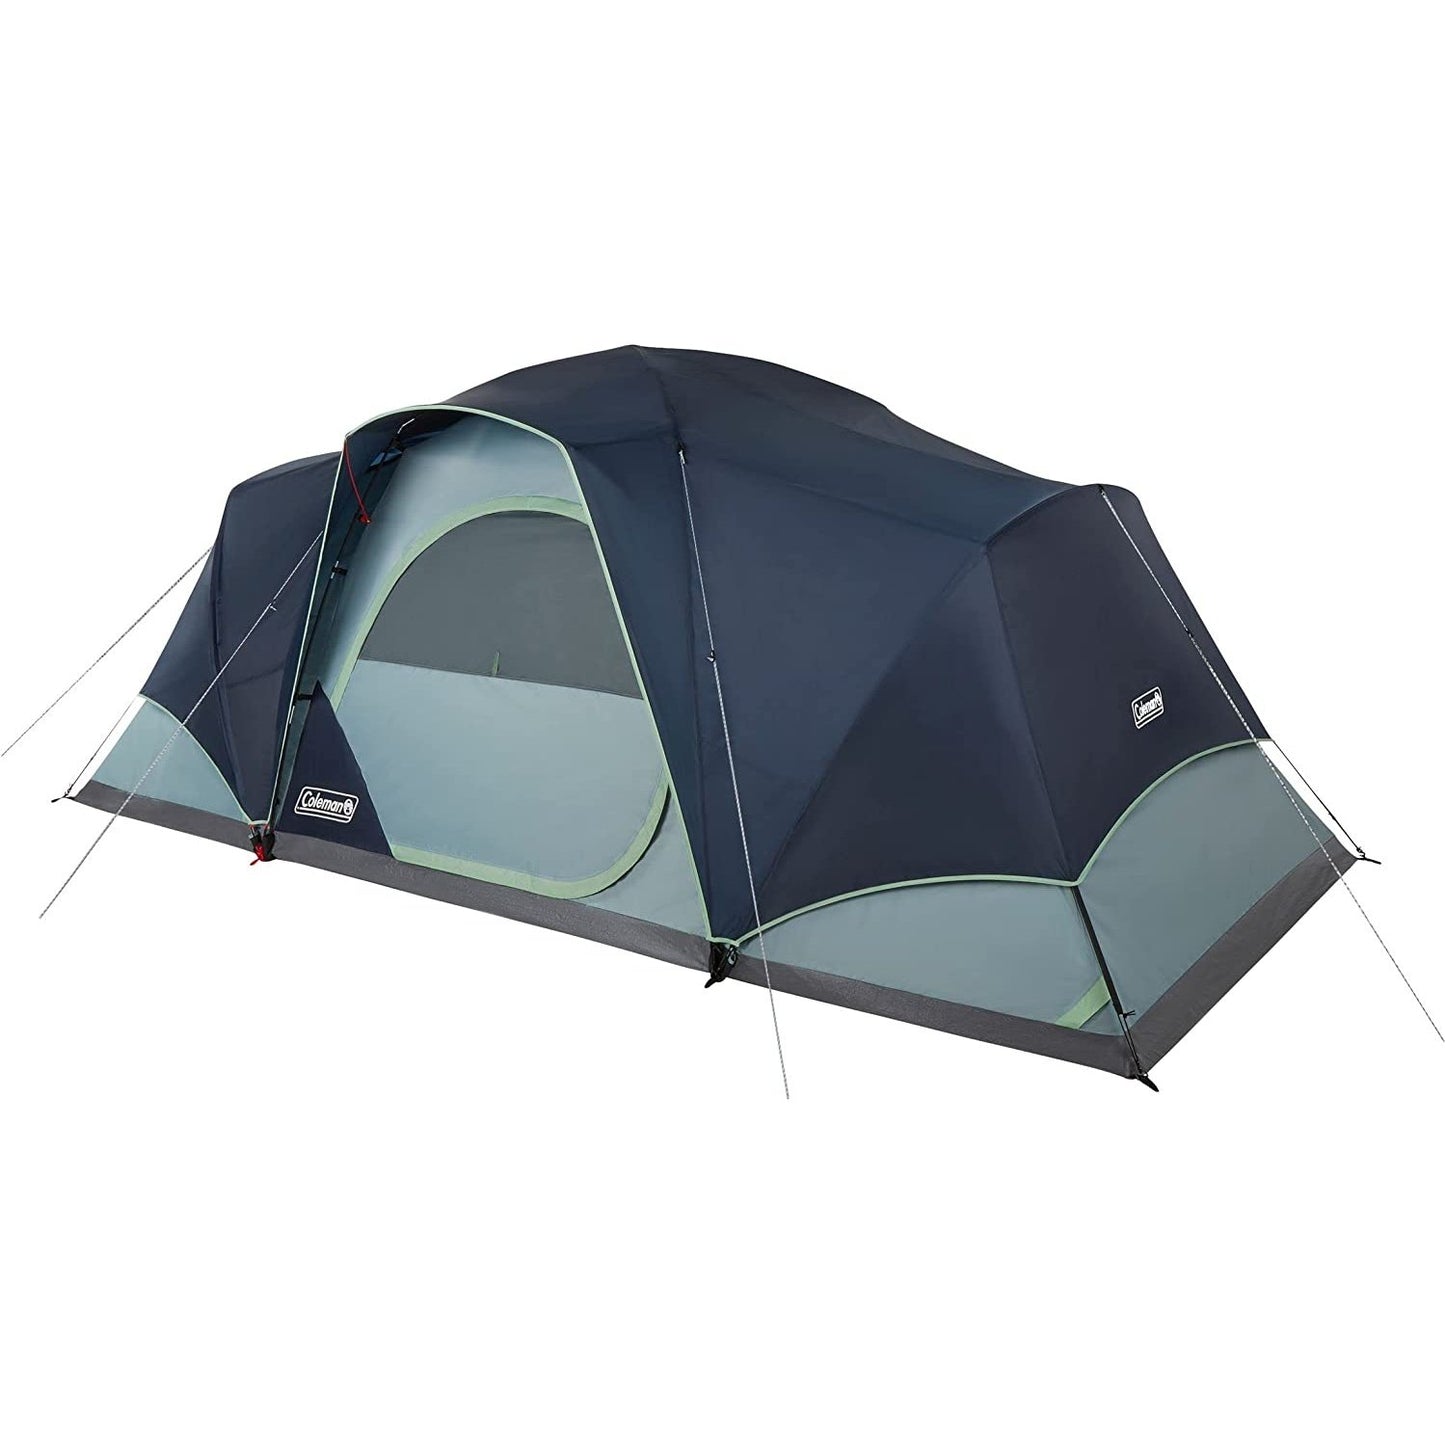 Skydome 8-Person Camping Tent XL, Blue Nights